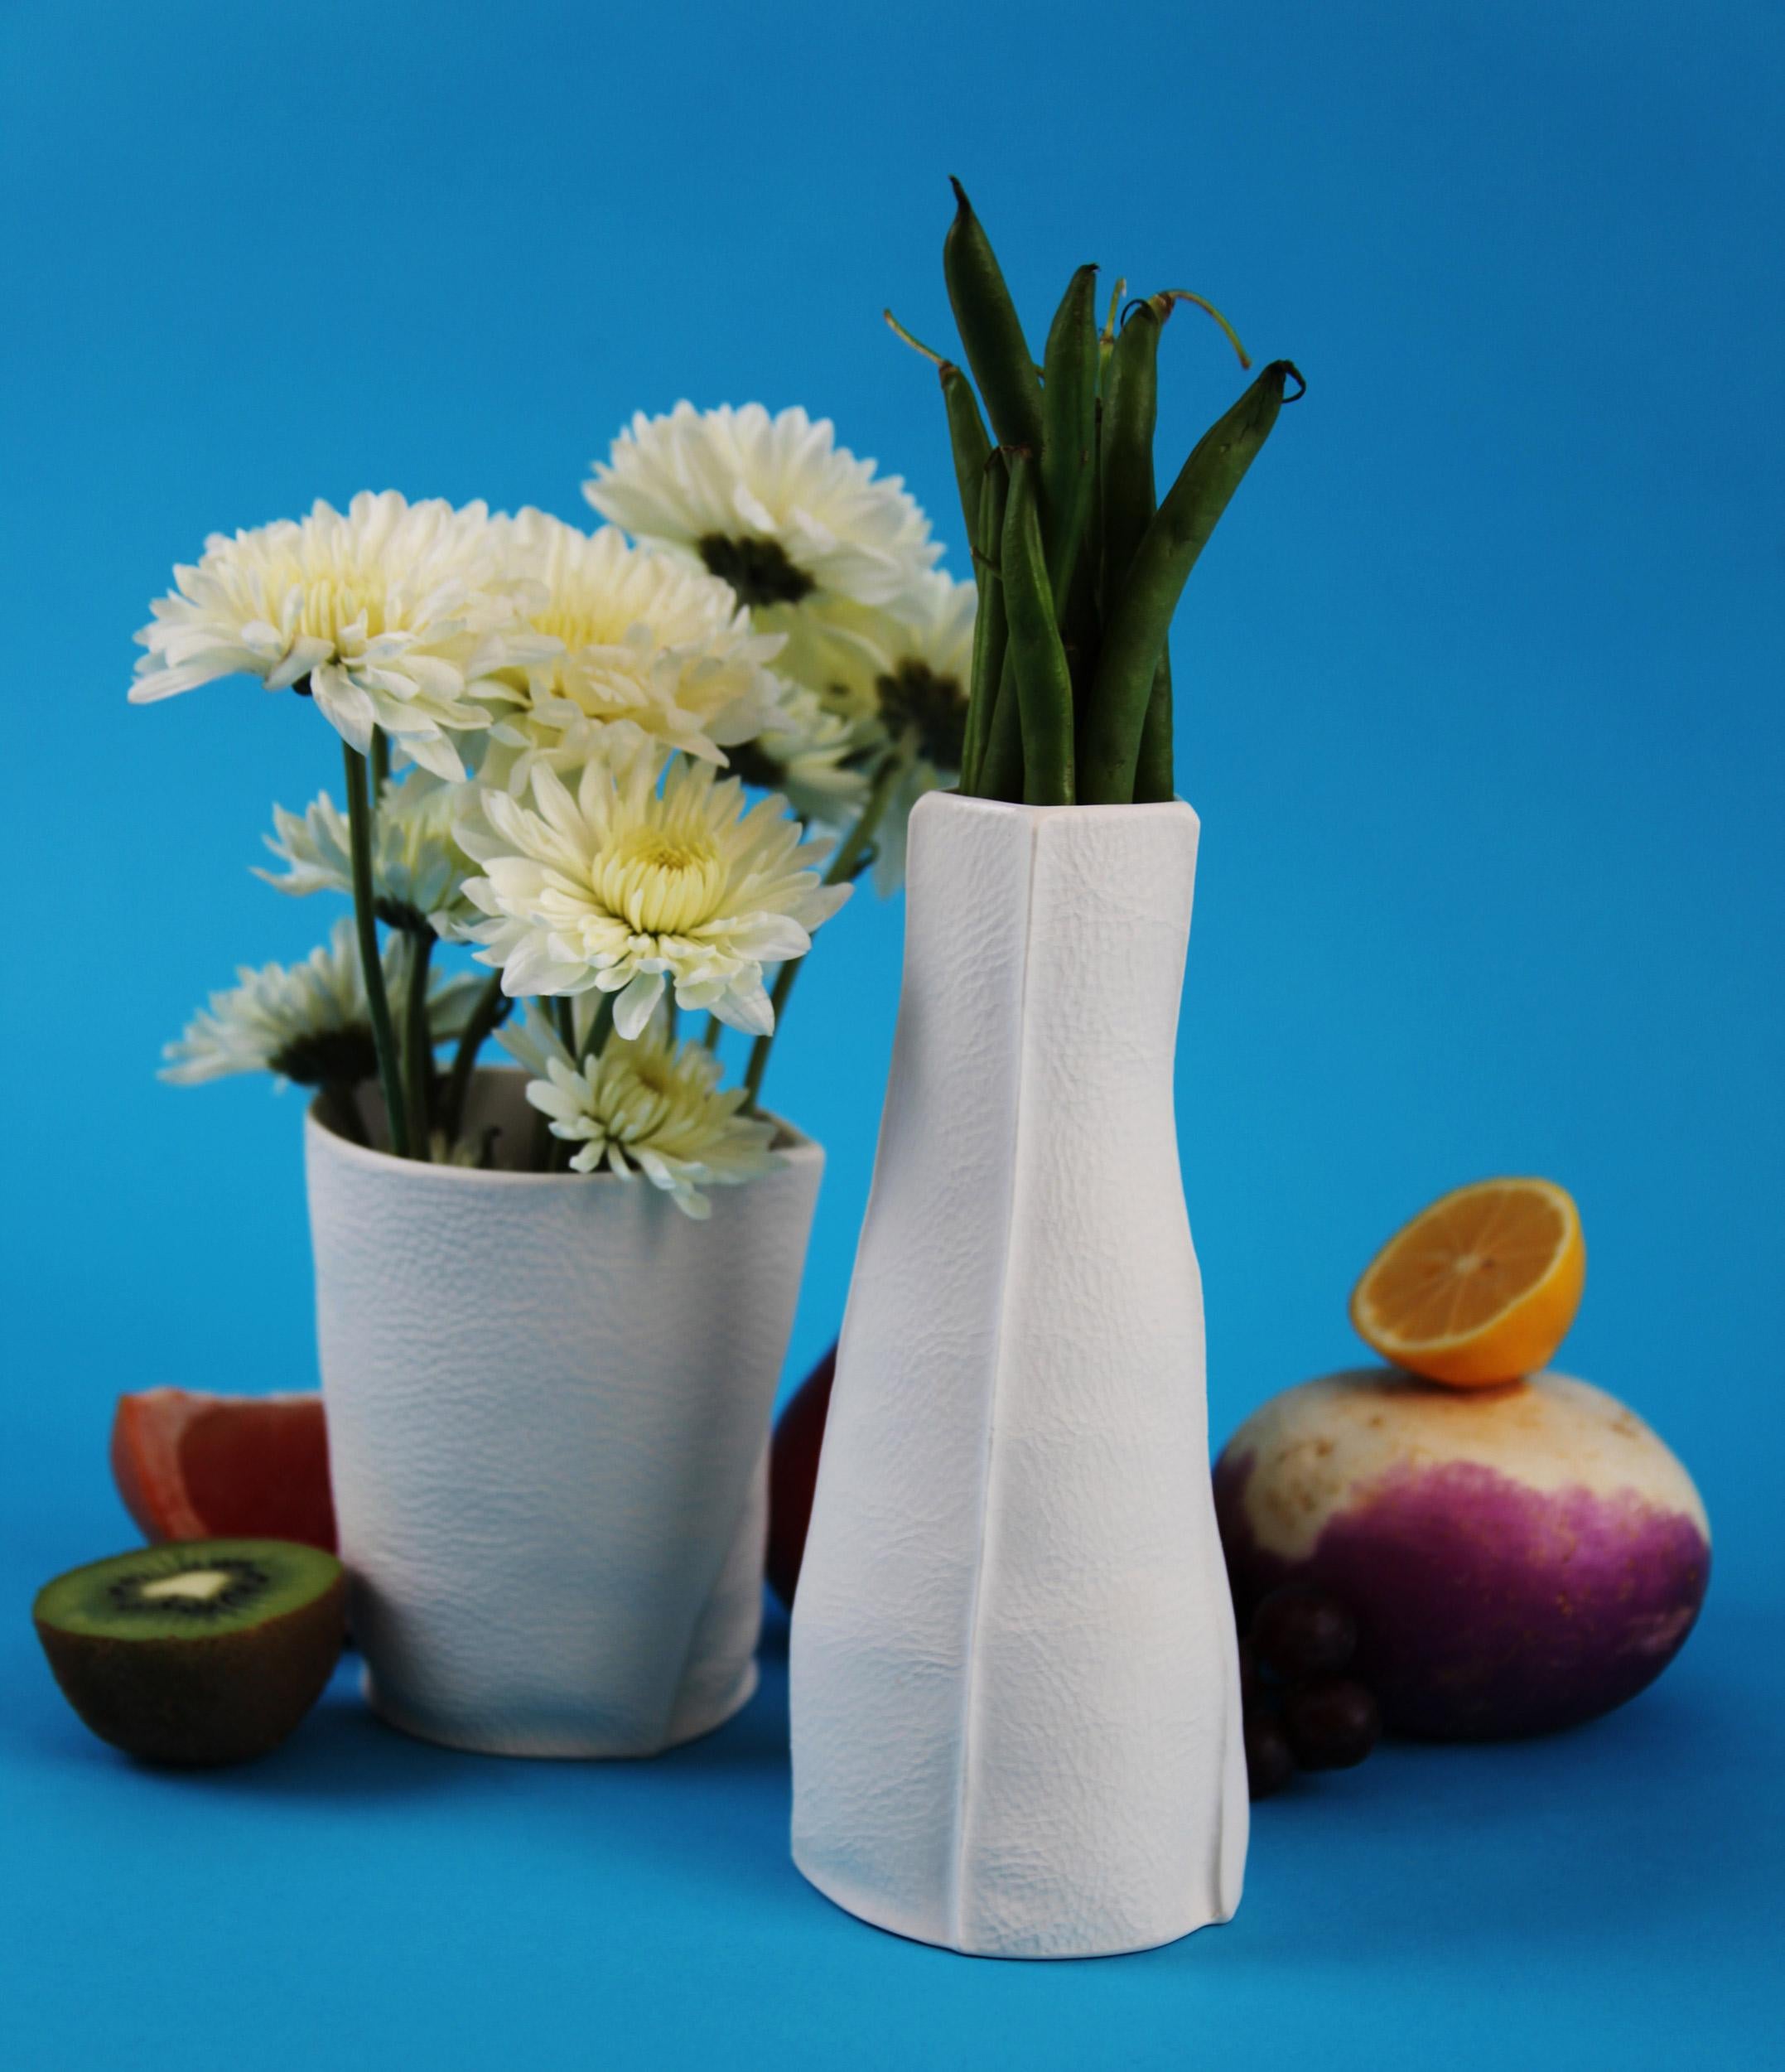 Tactile and organic porcelain vase with leather textured exterior surface and clear glazed interior. Due to the production process, each item is one-of-a-kind.

Use individually as an understated accent or in a pair or cluster for a little more